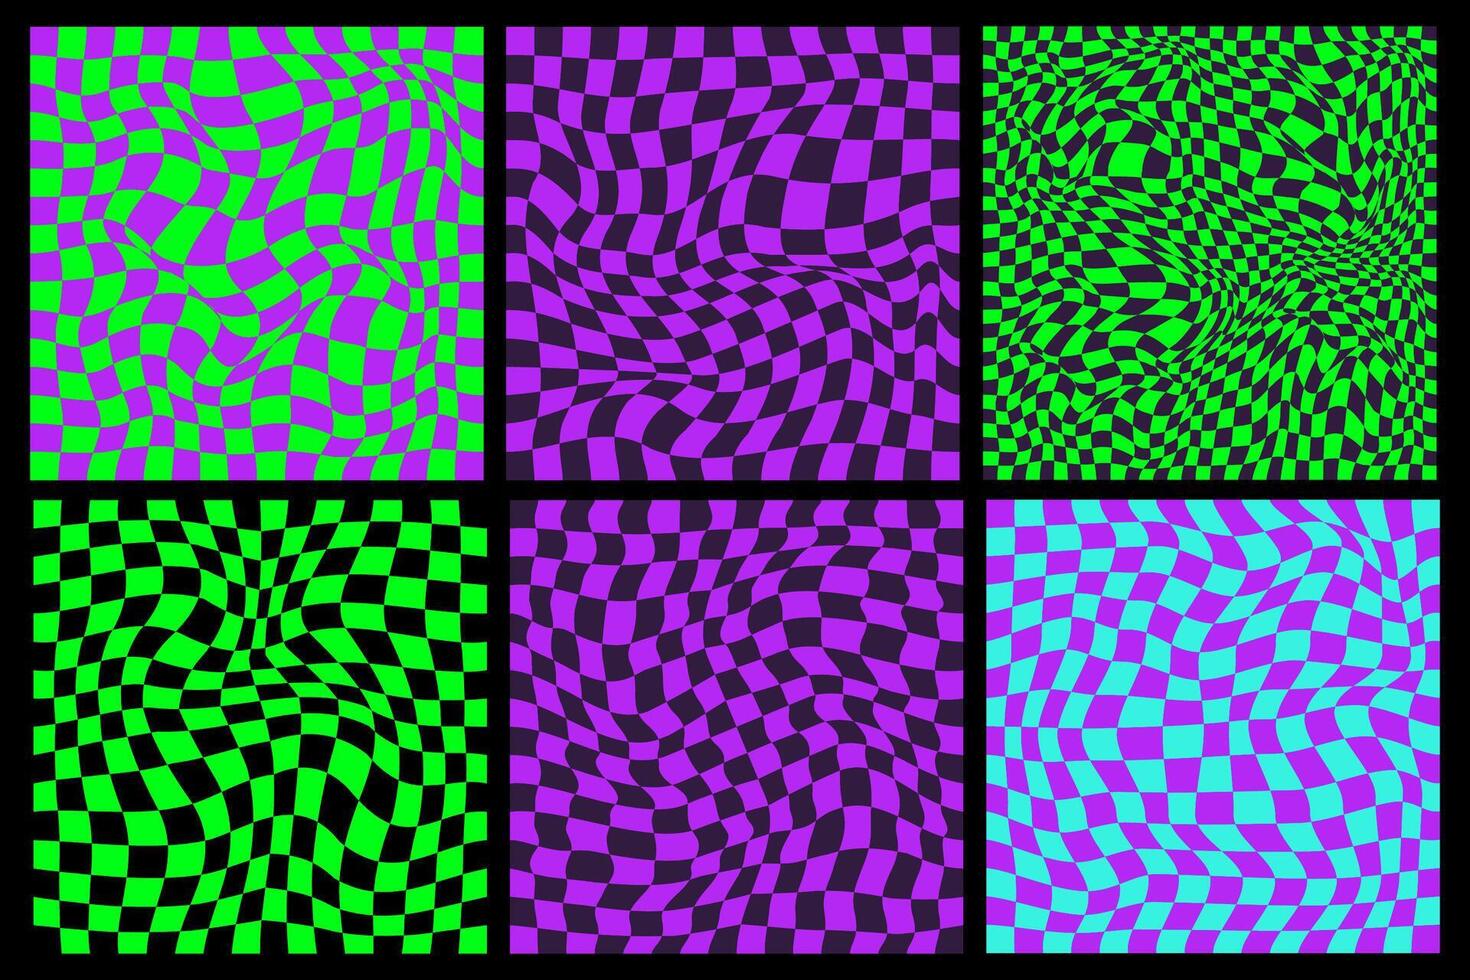 Checkerboard psychedelic pattern set black and white. Checkerboard background y2k retro grid. Psychedelic texture vector illustration.